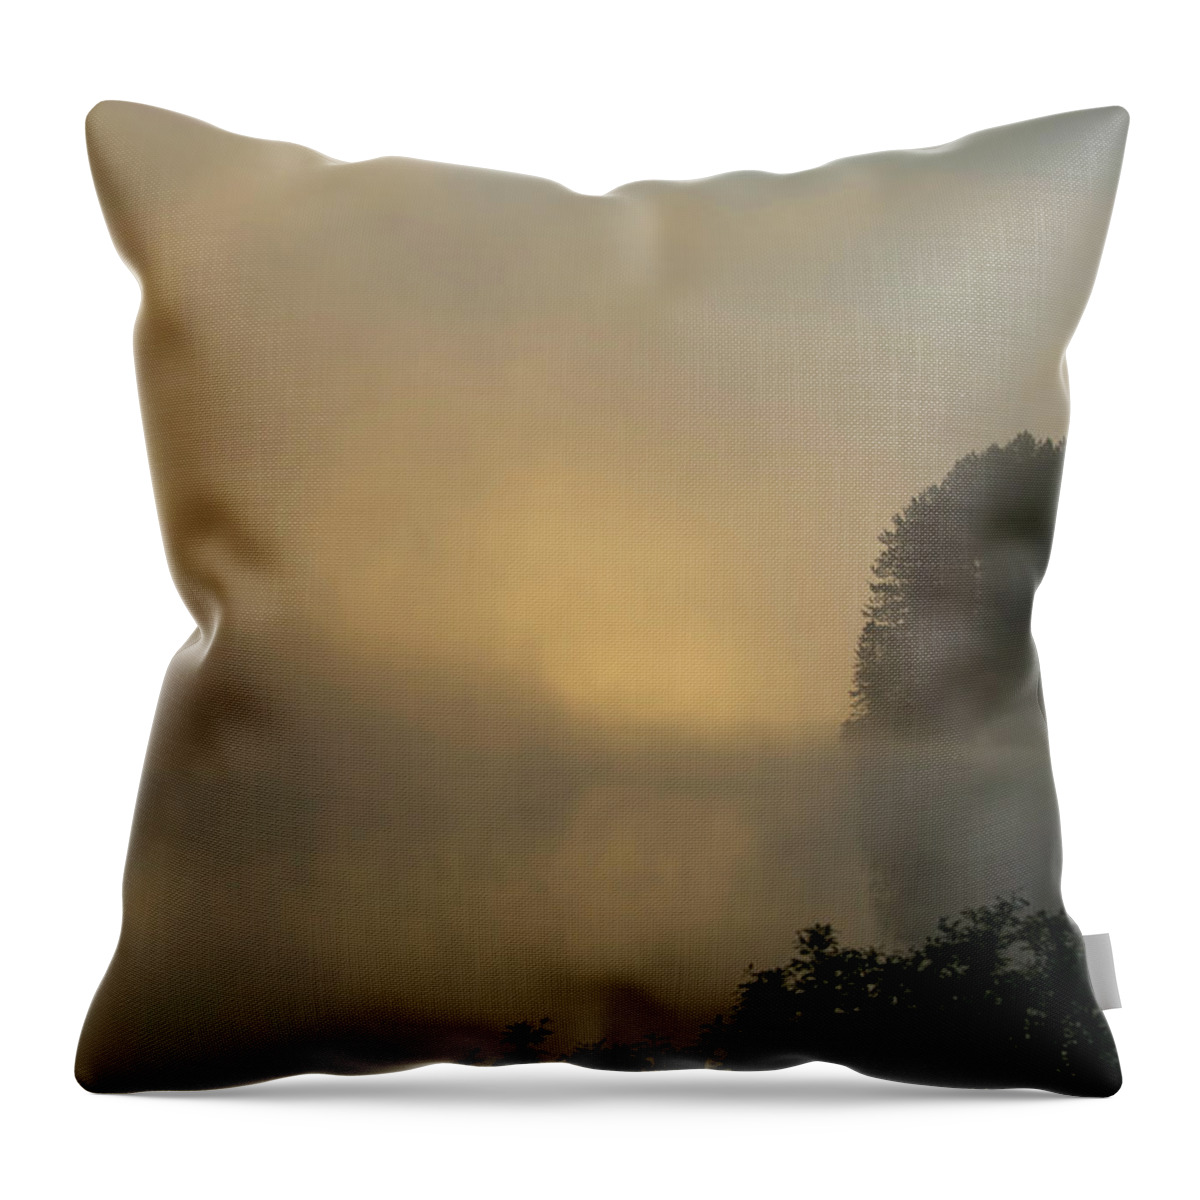 Algonquin Throw Pillow featuring the photograph Algonquin Morning by CR Courson